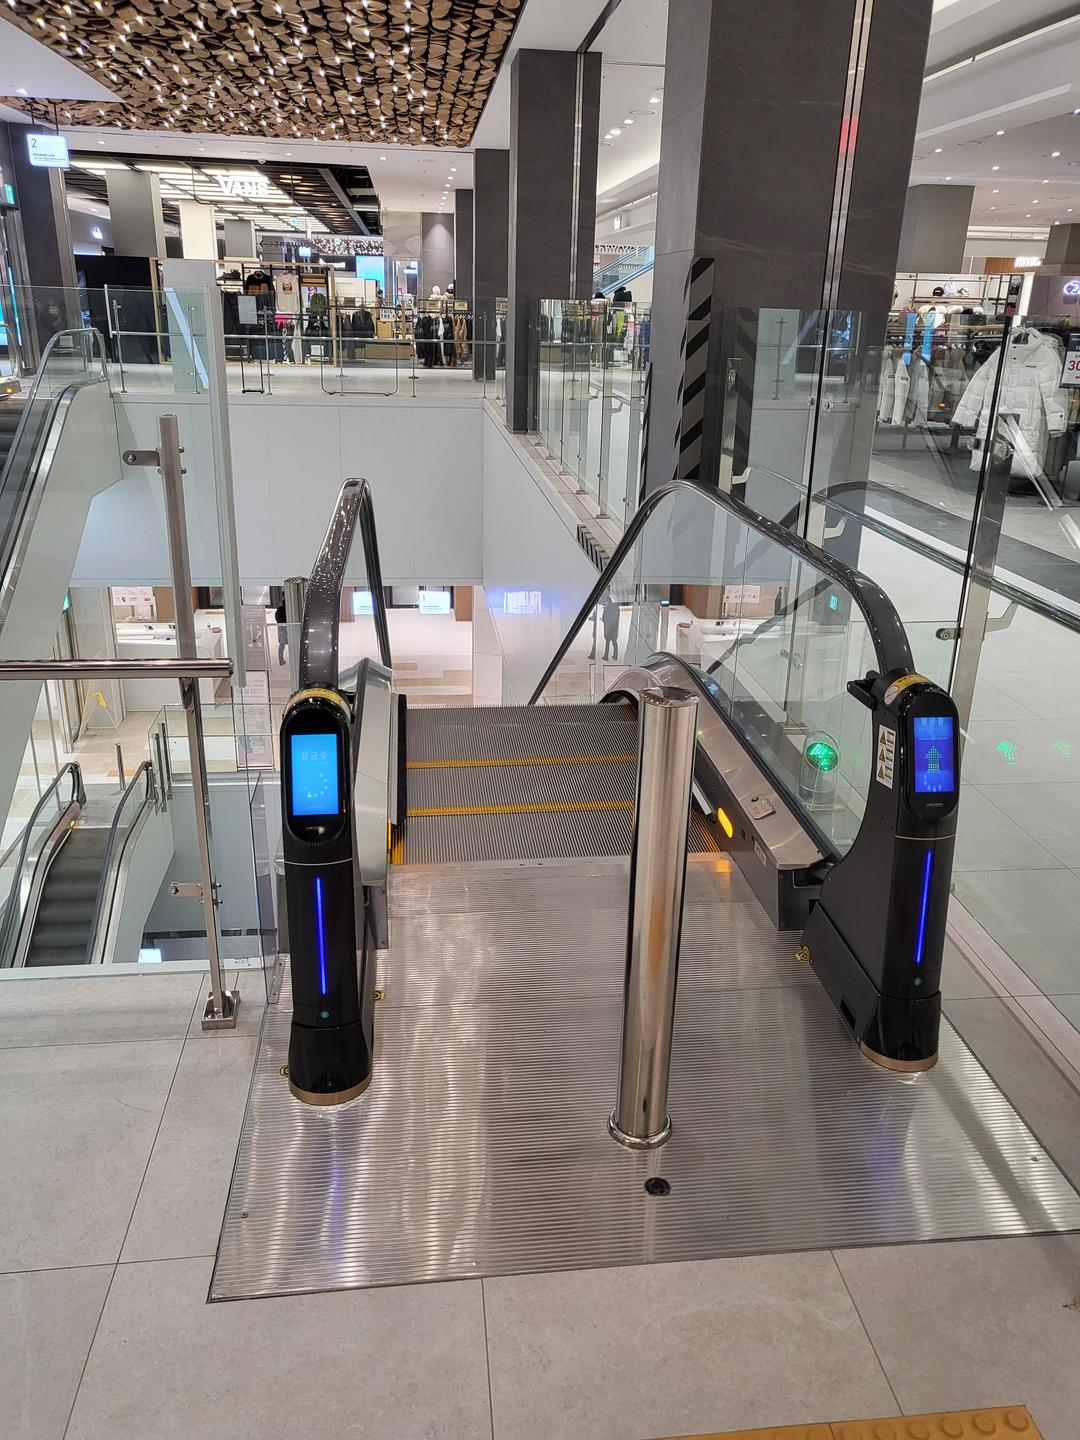 Escalator handle sterilizer installed as part of the Corona 19 prevention system in a shopping mall (sterilization and cleaning) Weclean 4